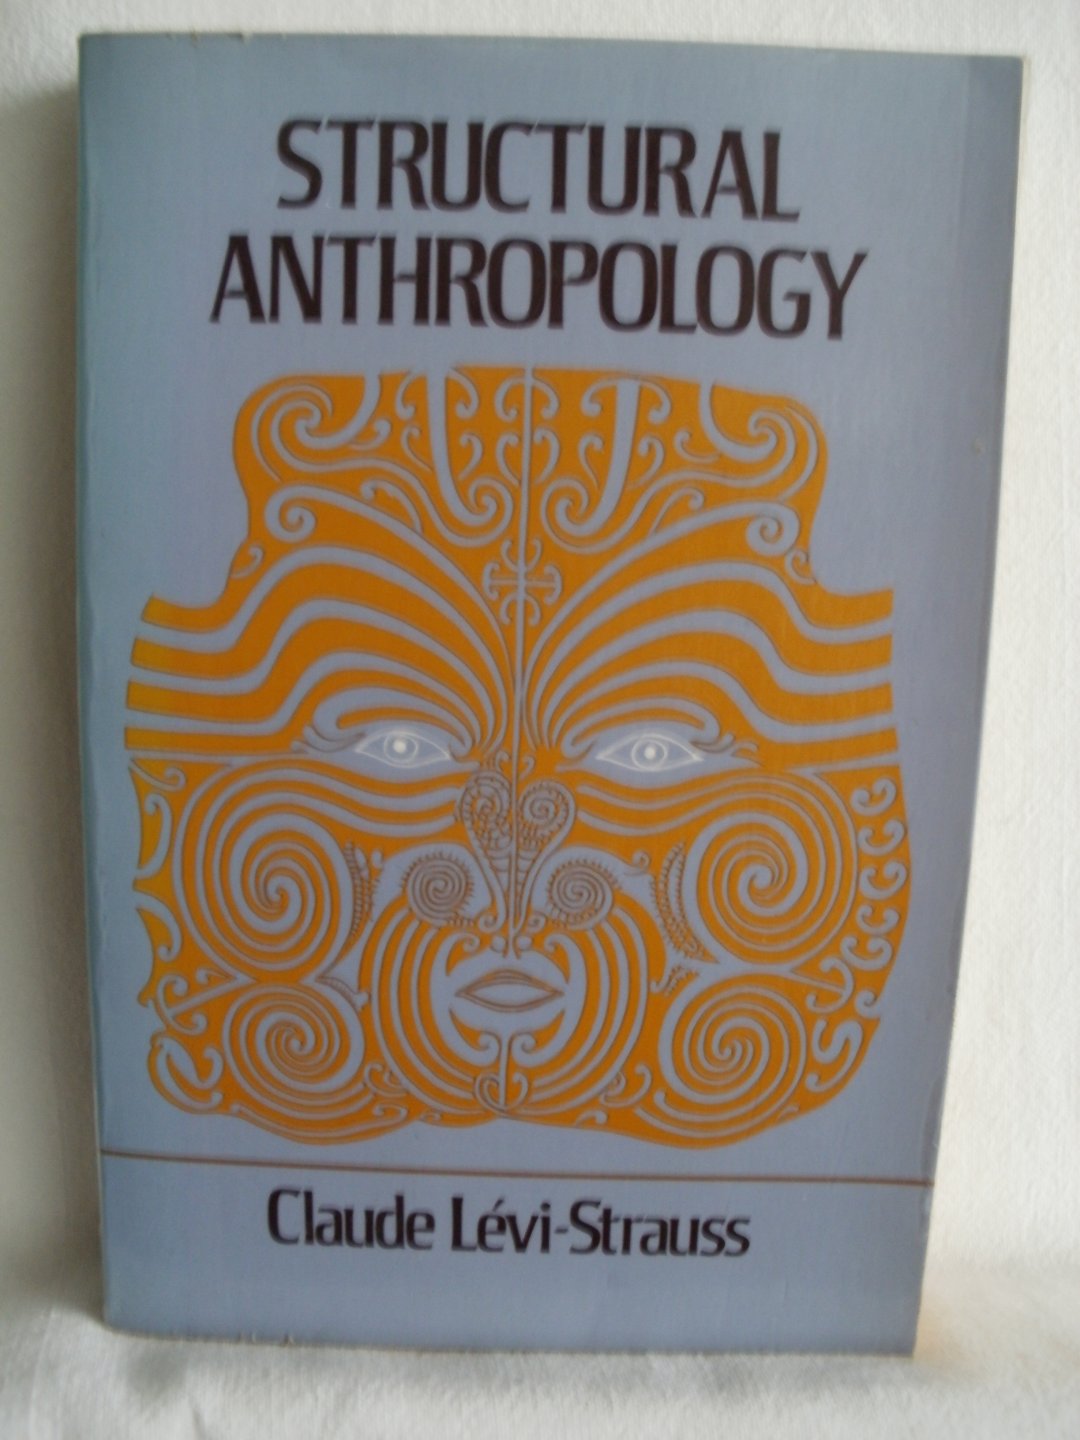 Levi-Strauus, Claude; Jacobsen, Claire; Grundfest Schoepf, Brooke (translation from French) - Structural Anthropology